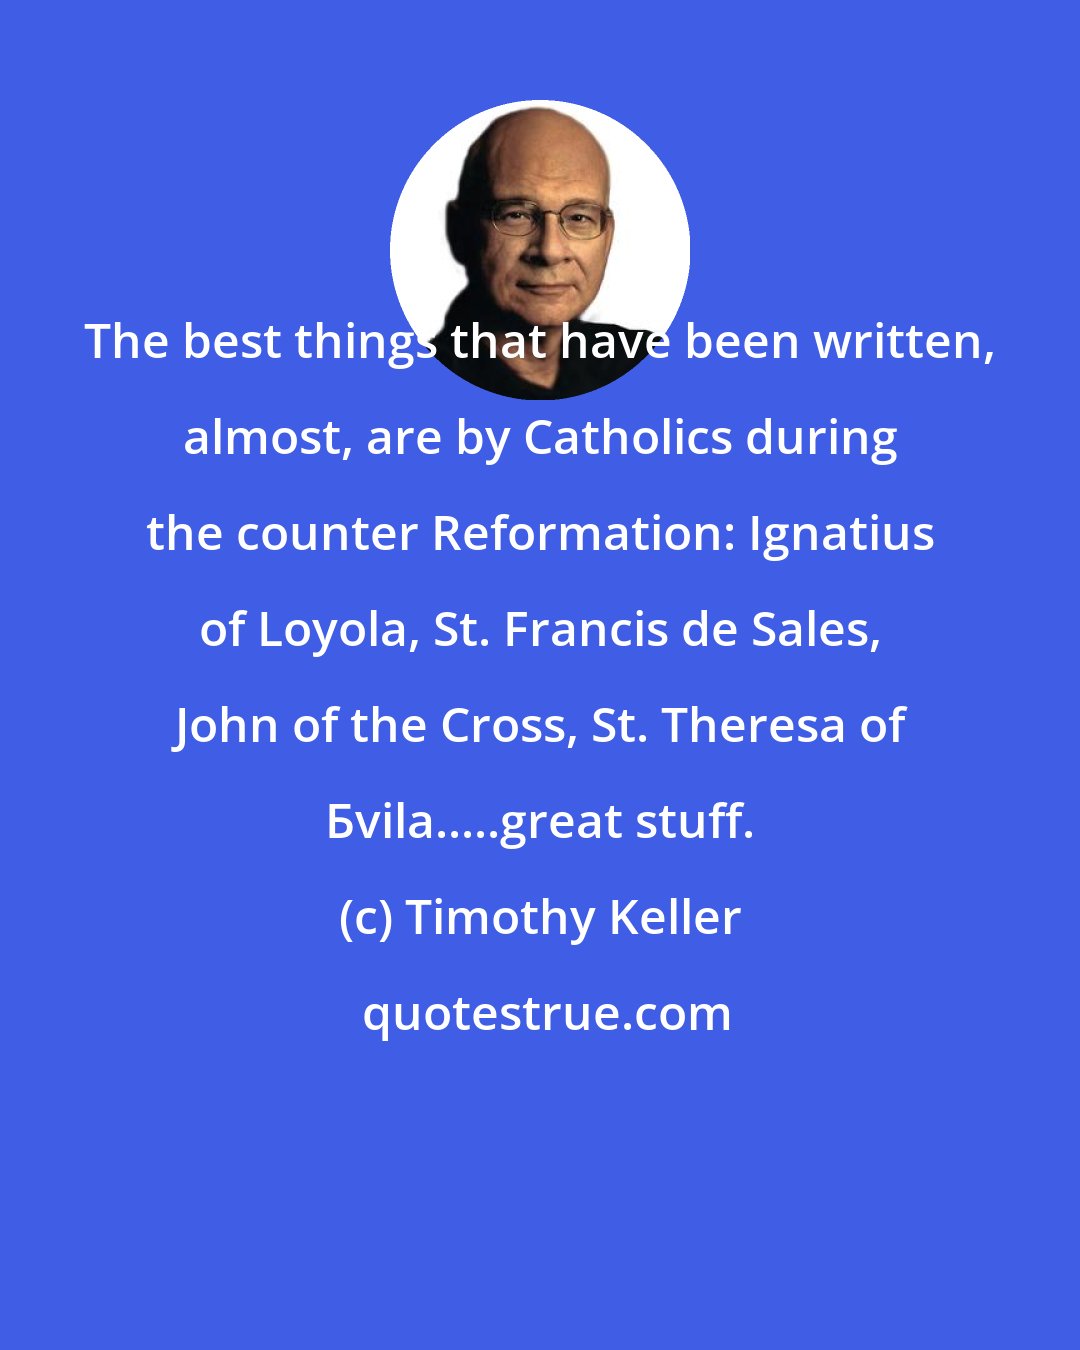 Timothy Keller: The best things that have been written, almost, are by Catholics during the counter Reformation: Ignatius of Loyola, St. Francis de Sales, John of the Cross, St. Theresa of Бvila.....great stuff.